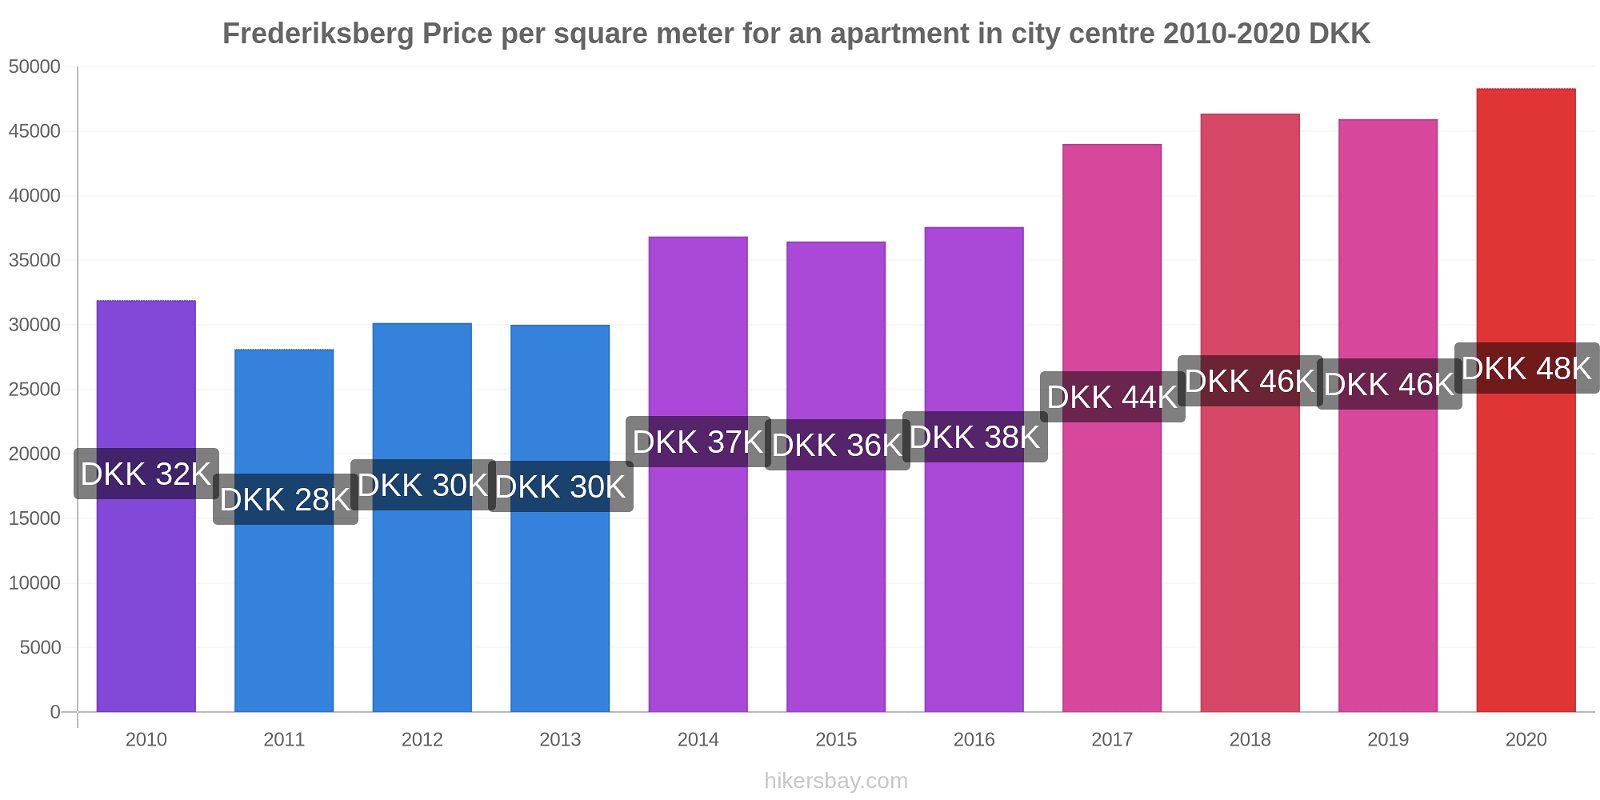 Frederiksberg price changes Price per square meter for an apartment in city centre hikersbay.com